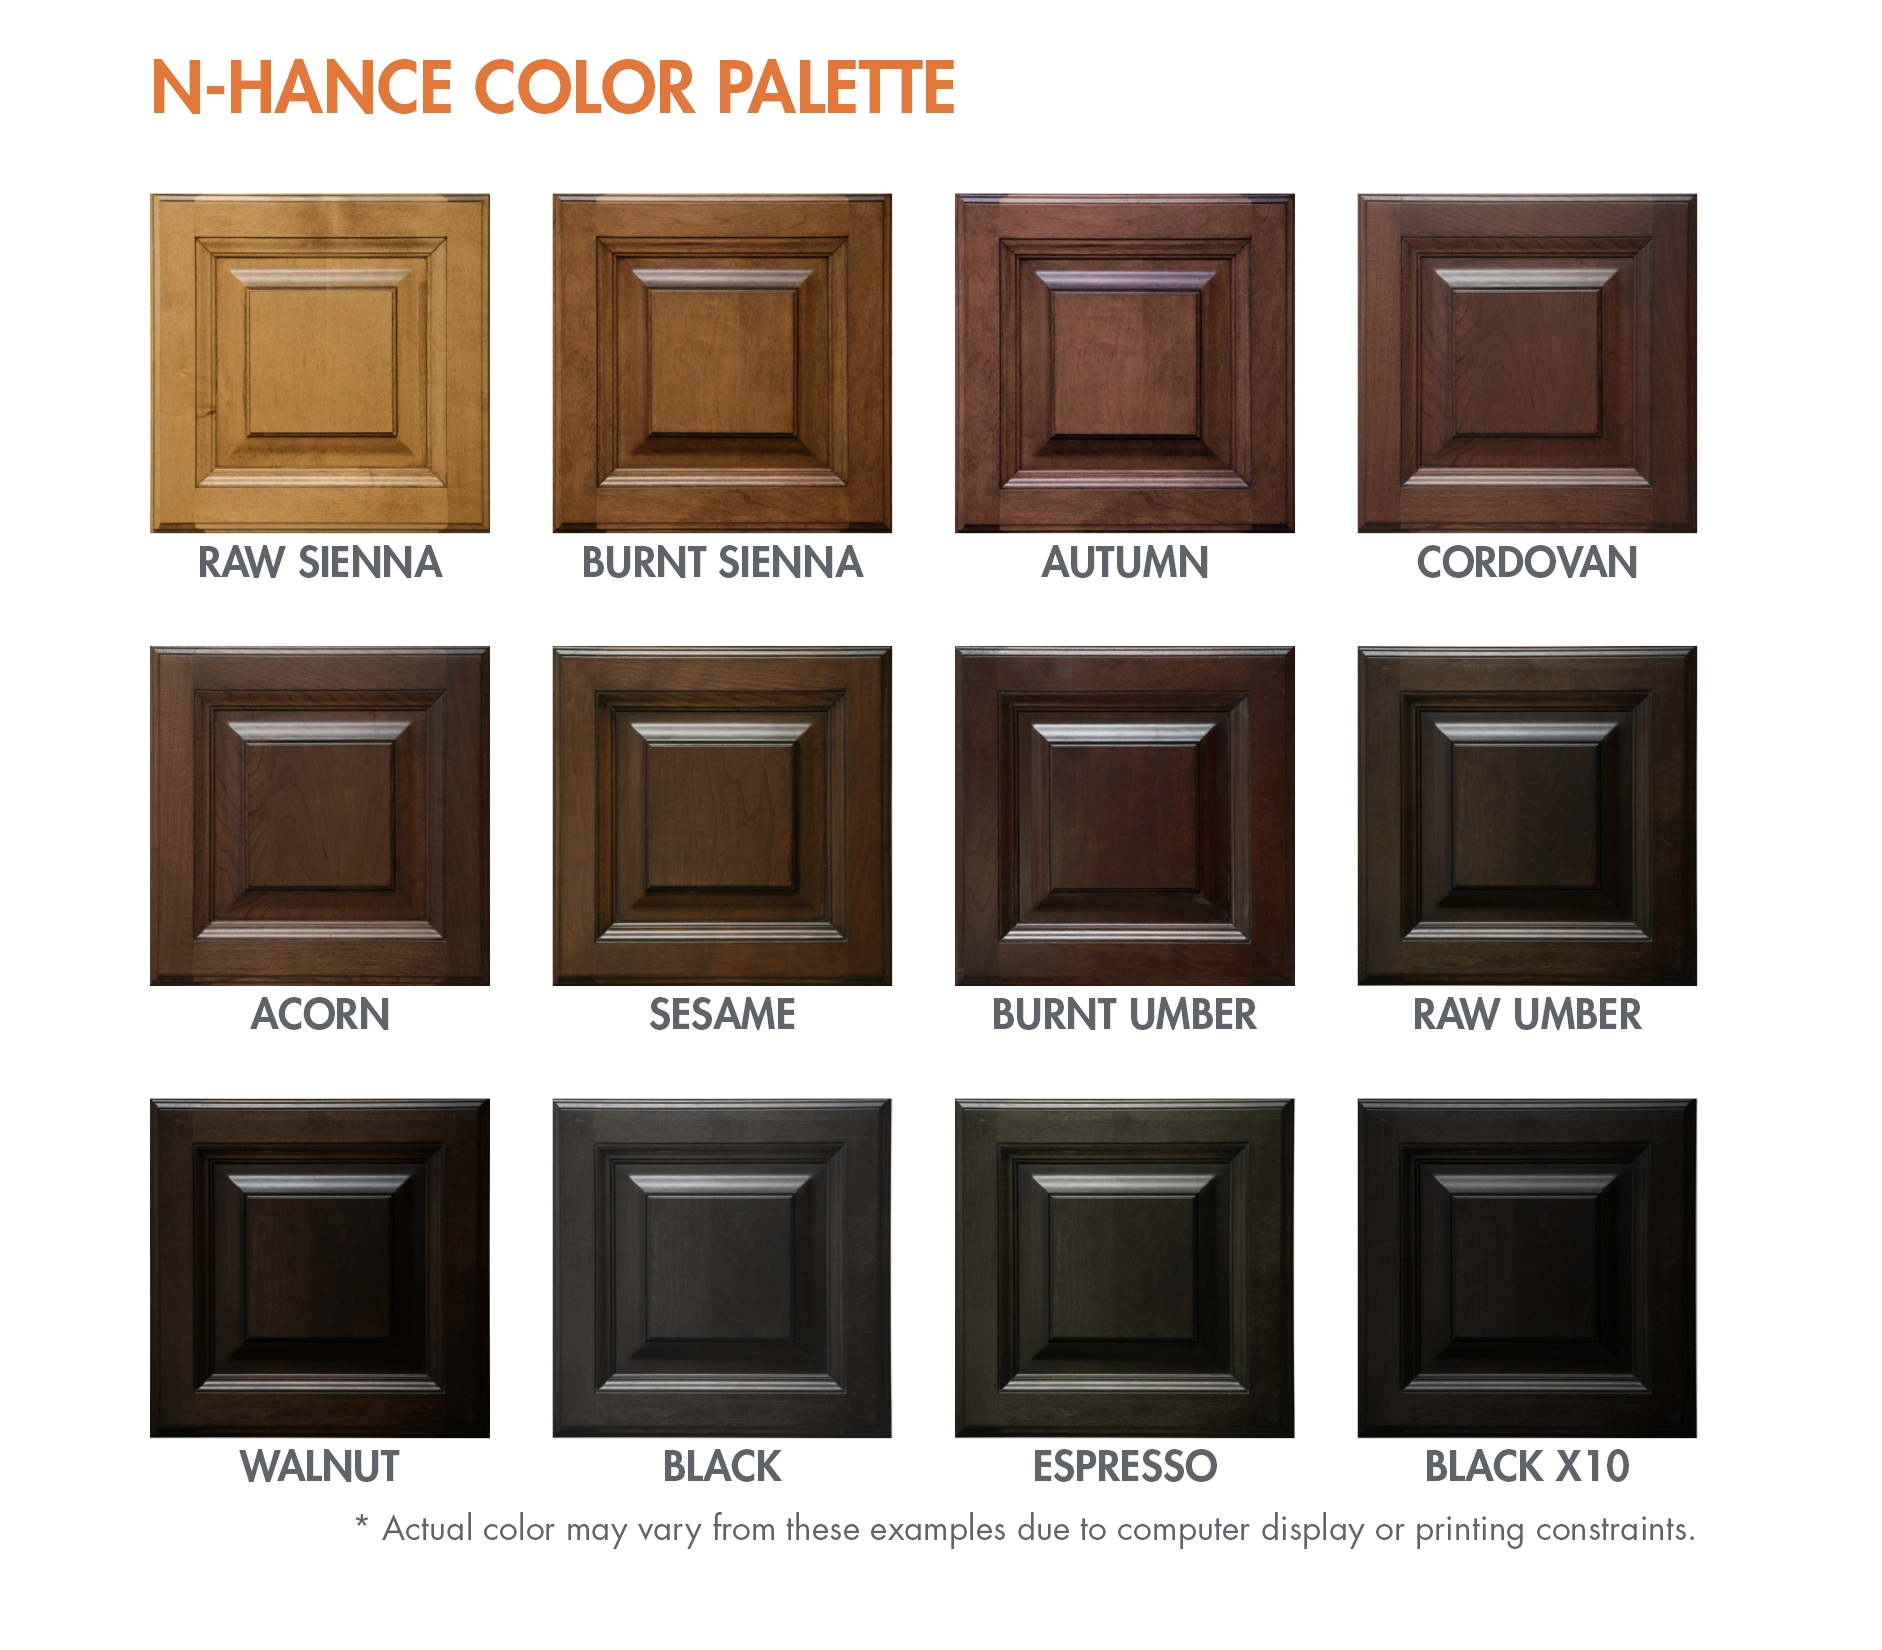 Text at the top of the image reads N-Hance Color Palette. The image shows 12 samples of cabinet doors stained in different colors in the N-Hance Color palette.